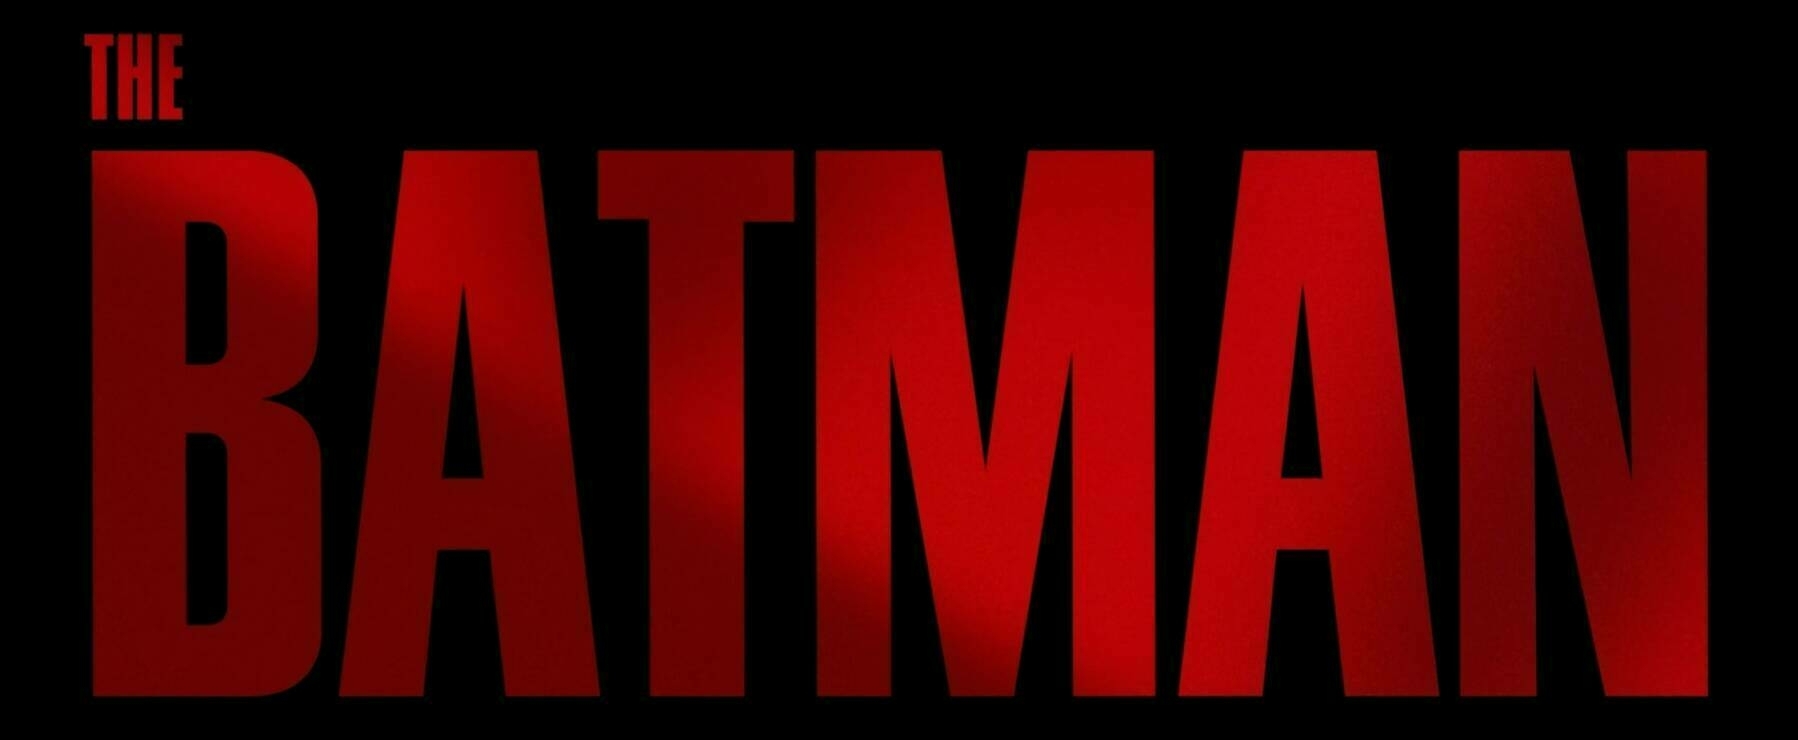 The main title card for the film, The Batman.